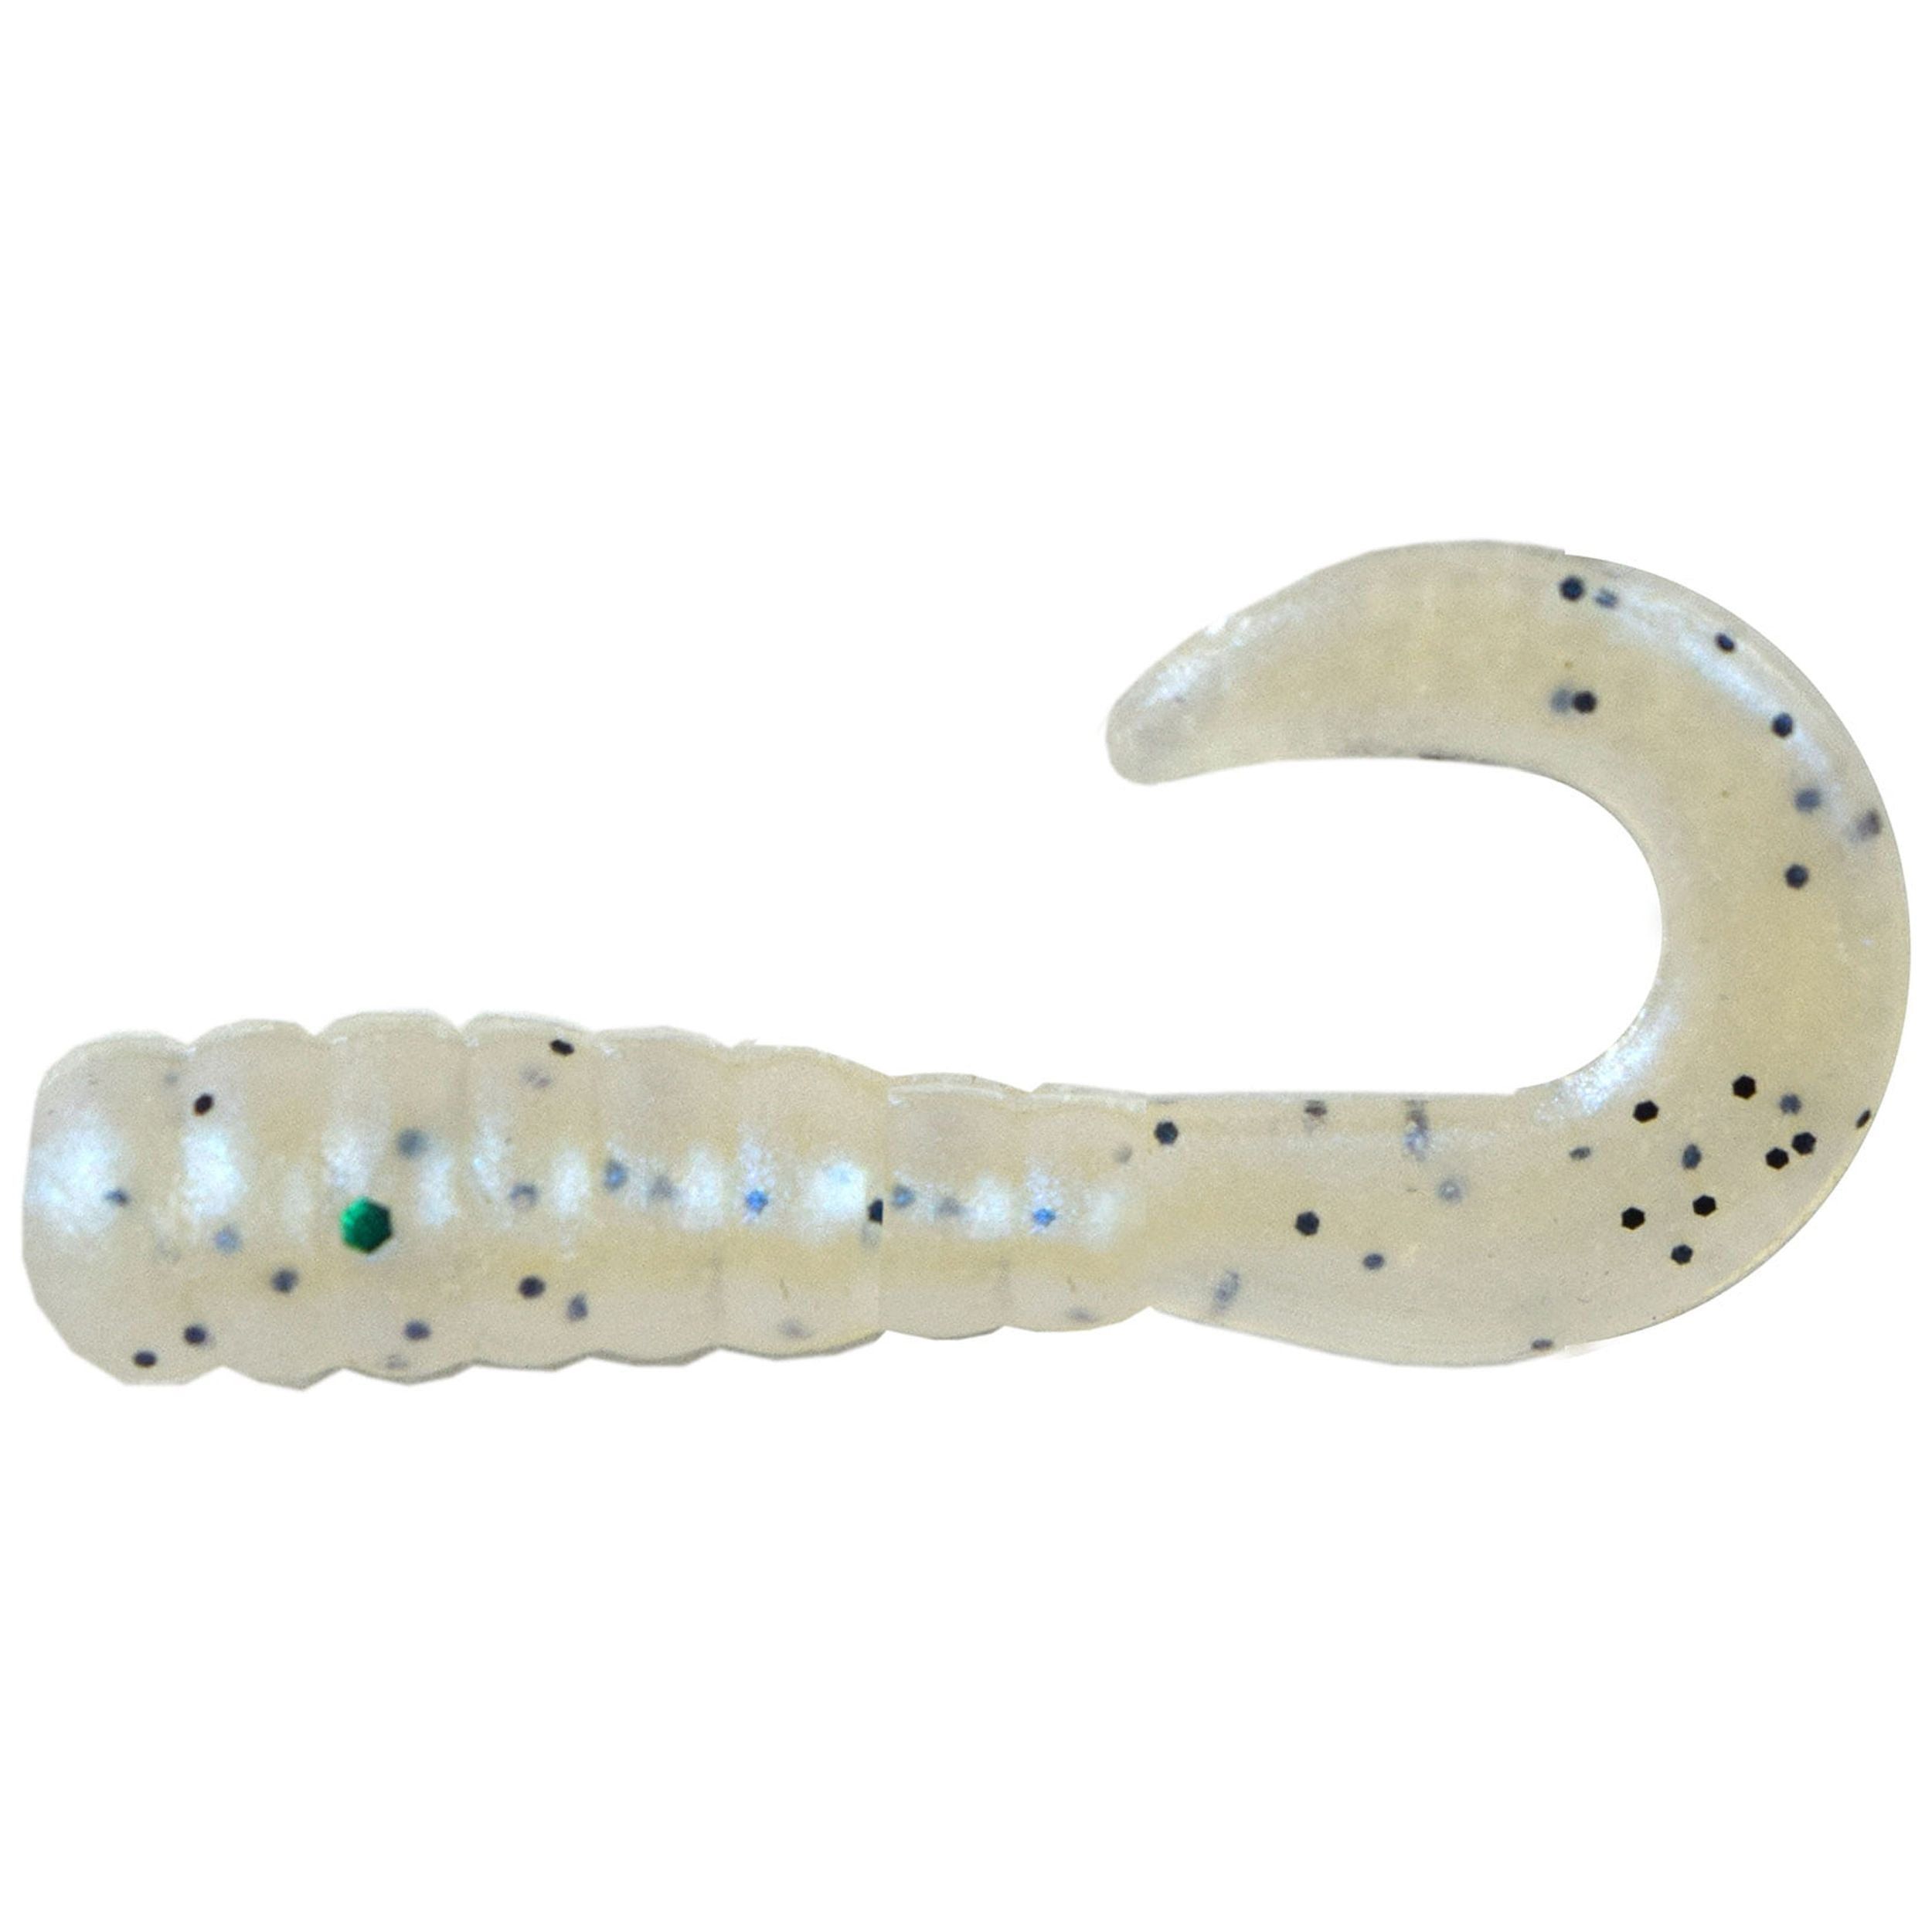 Tackle HD 100-Pack Grub Fishing Lures, 2-Inch Skirted Grub with